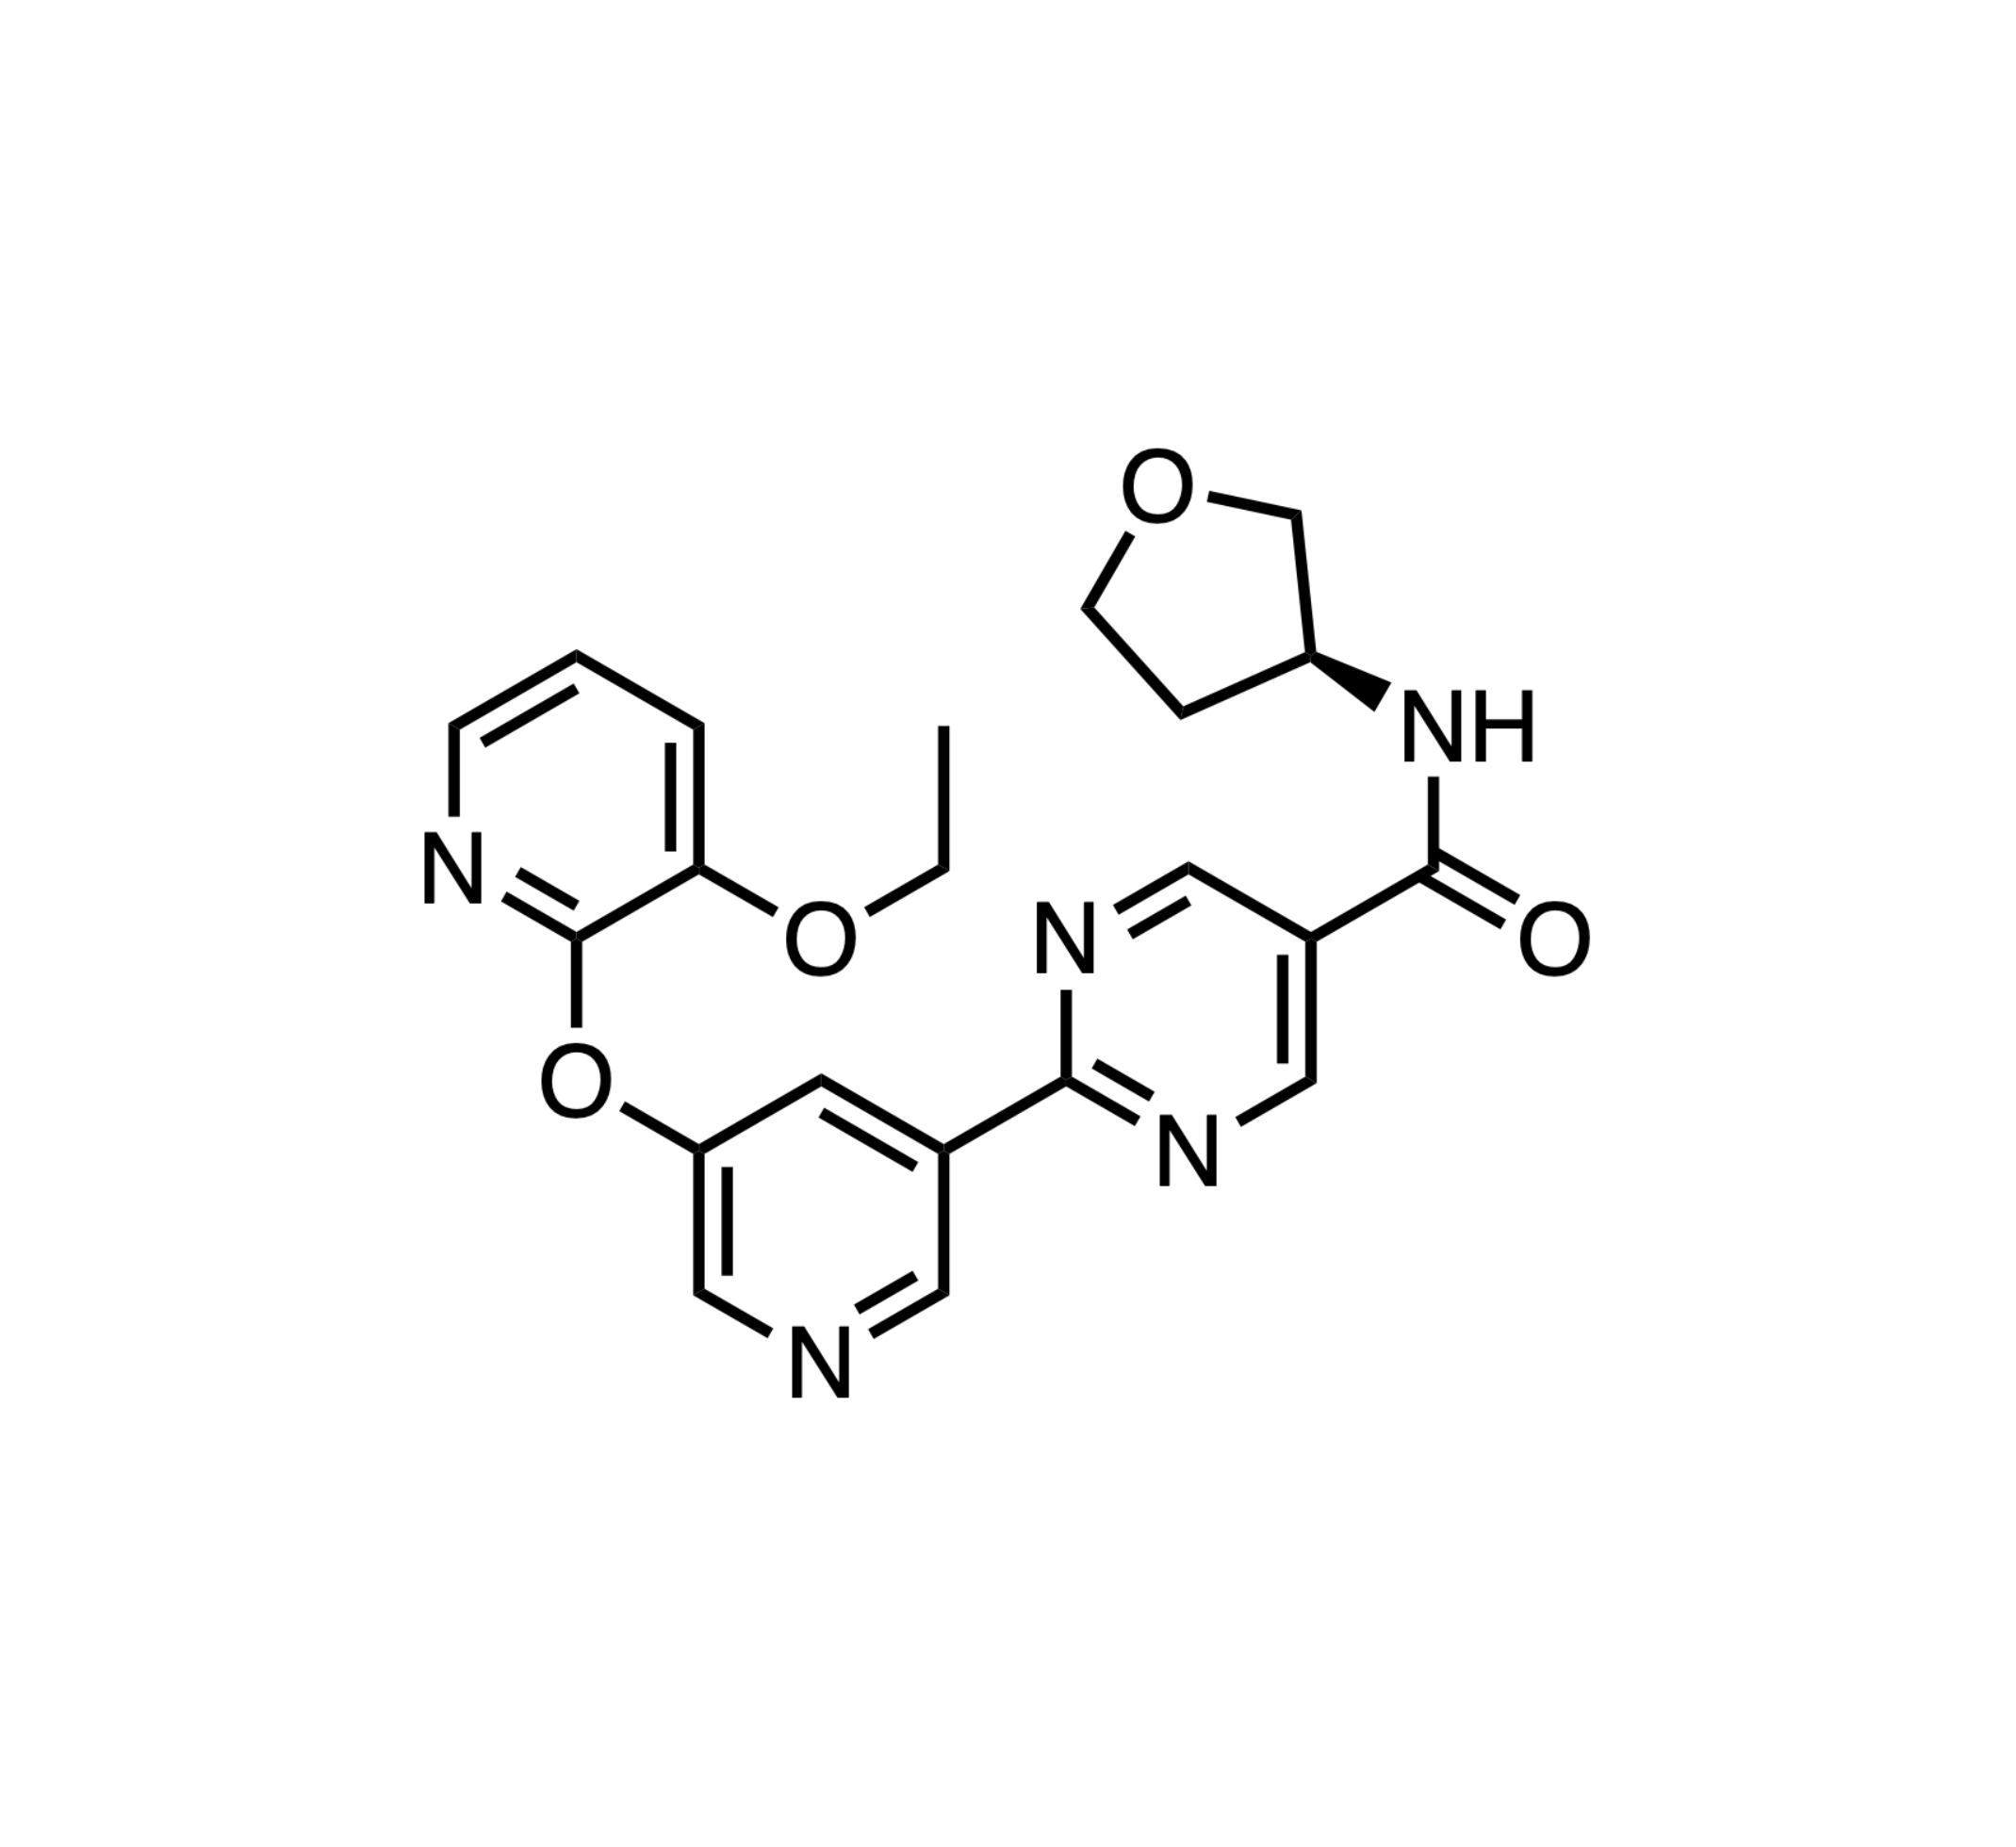 ervogastat chemical structure systemic, oral DGAT2 inhibitor- Pfizer, Cambridge, MA and Groton, CT||